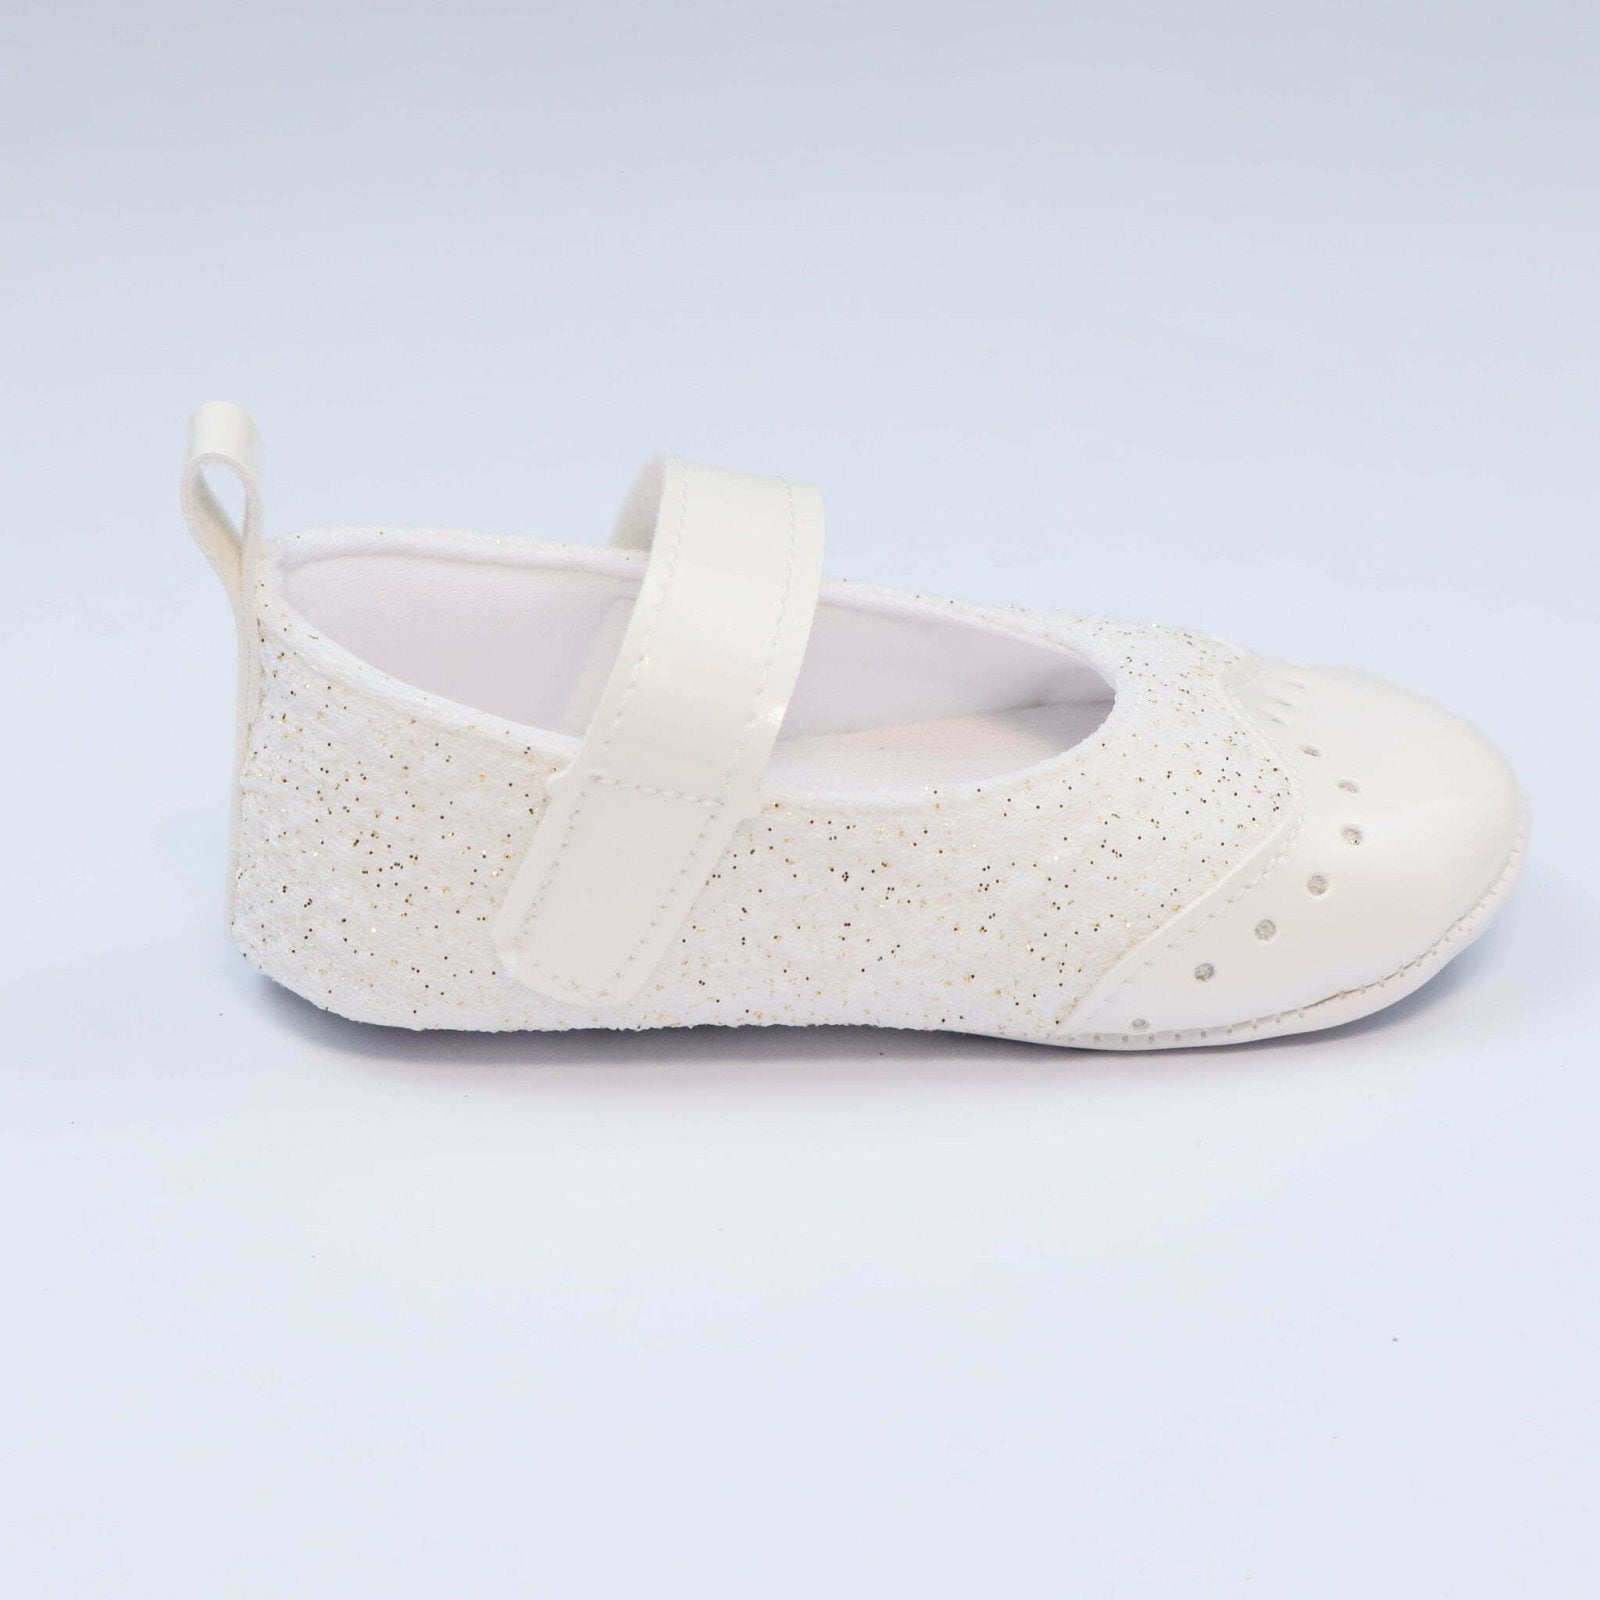 Baby Shoes White Color With Glitter by Baby Pattini